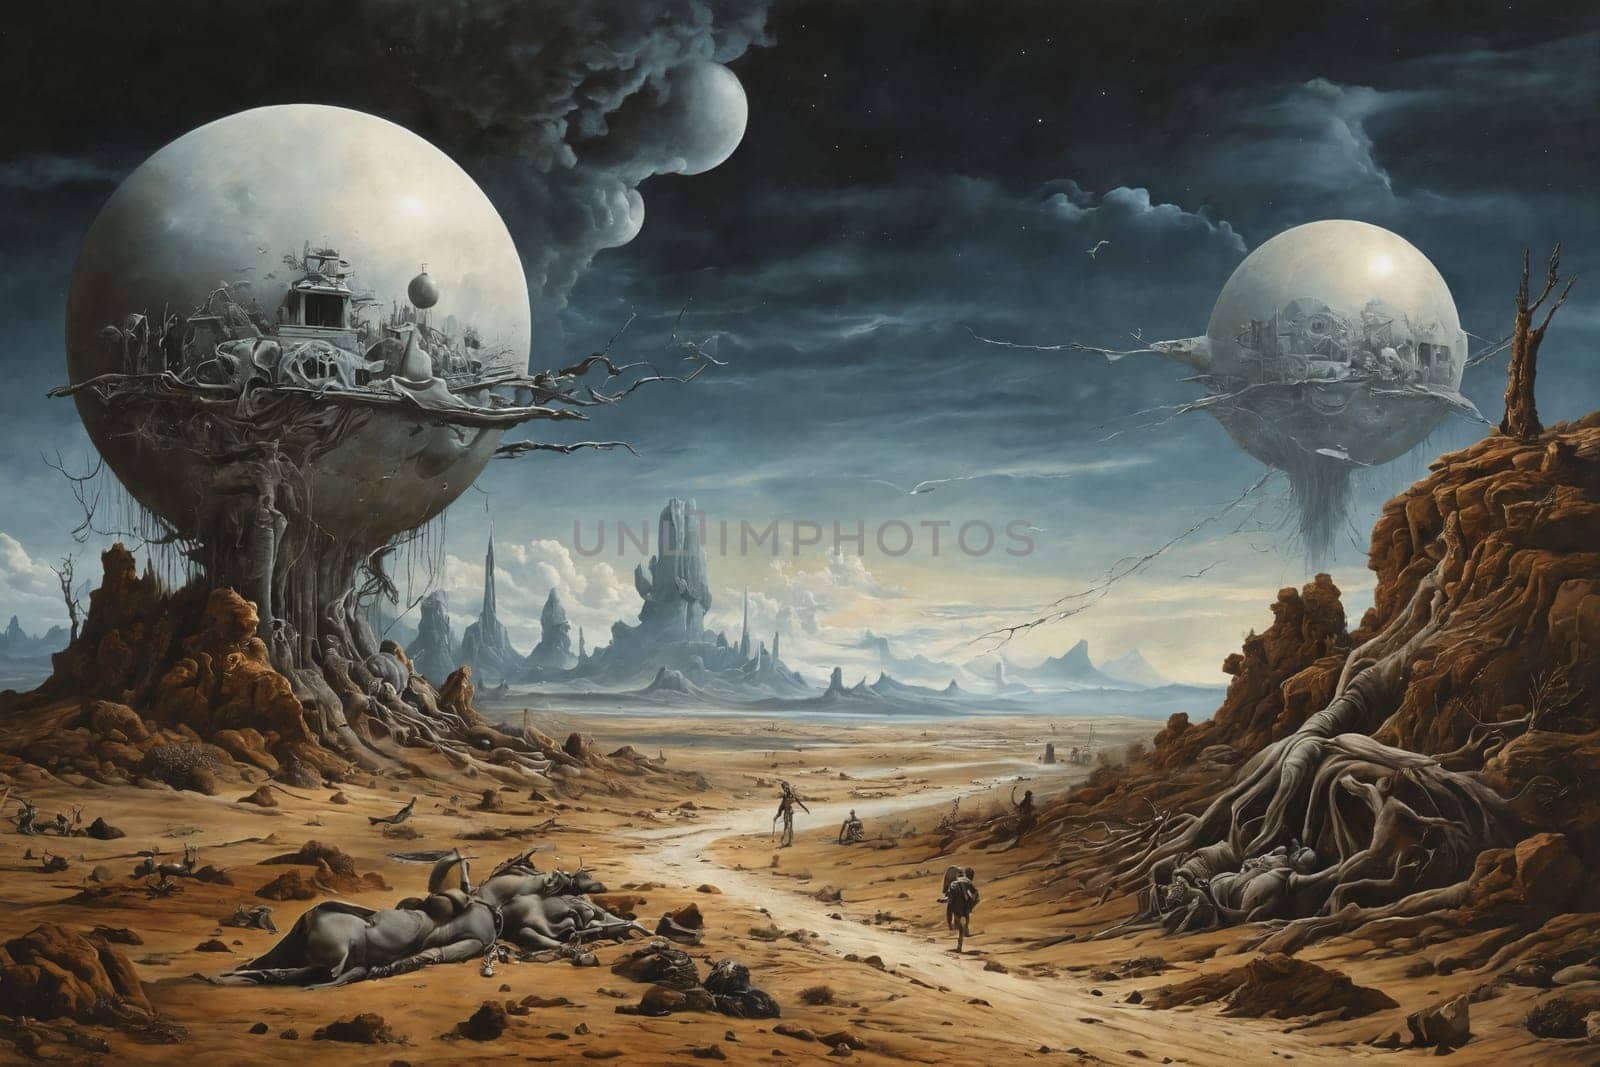 Two large, transparent spheres reveal complex inner workings in this barren, otherworldly landscape under a dark sky.